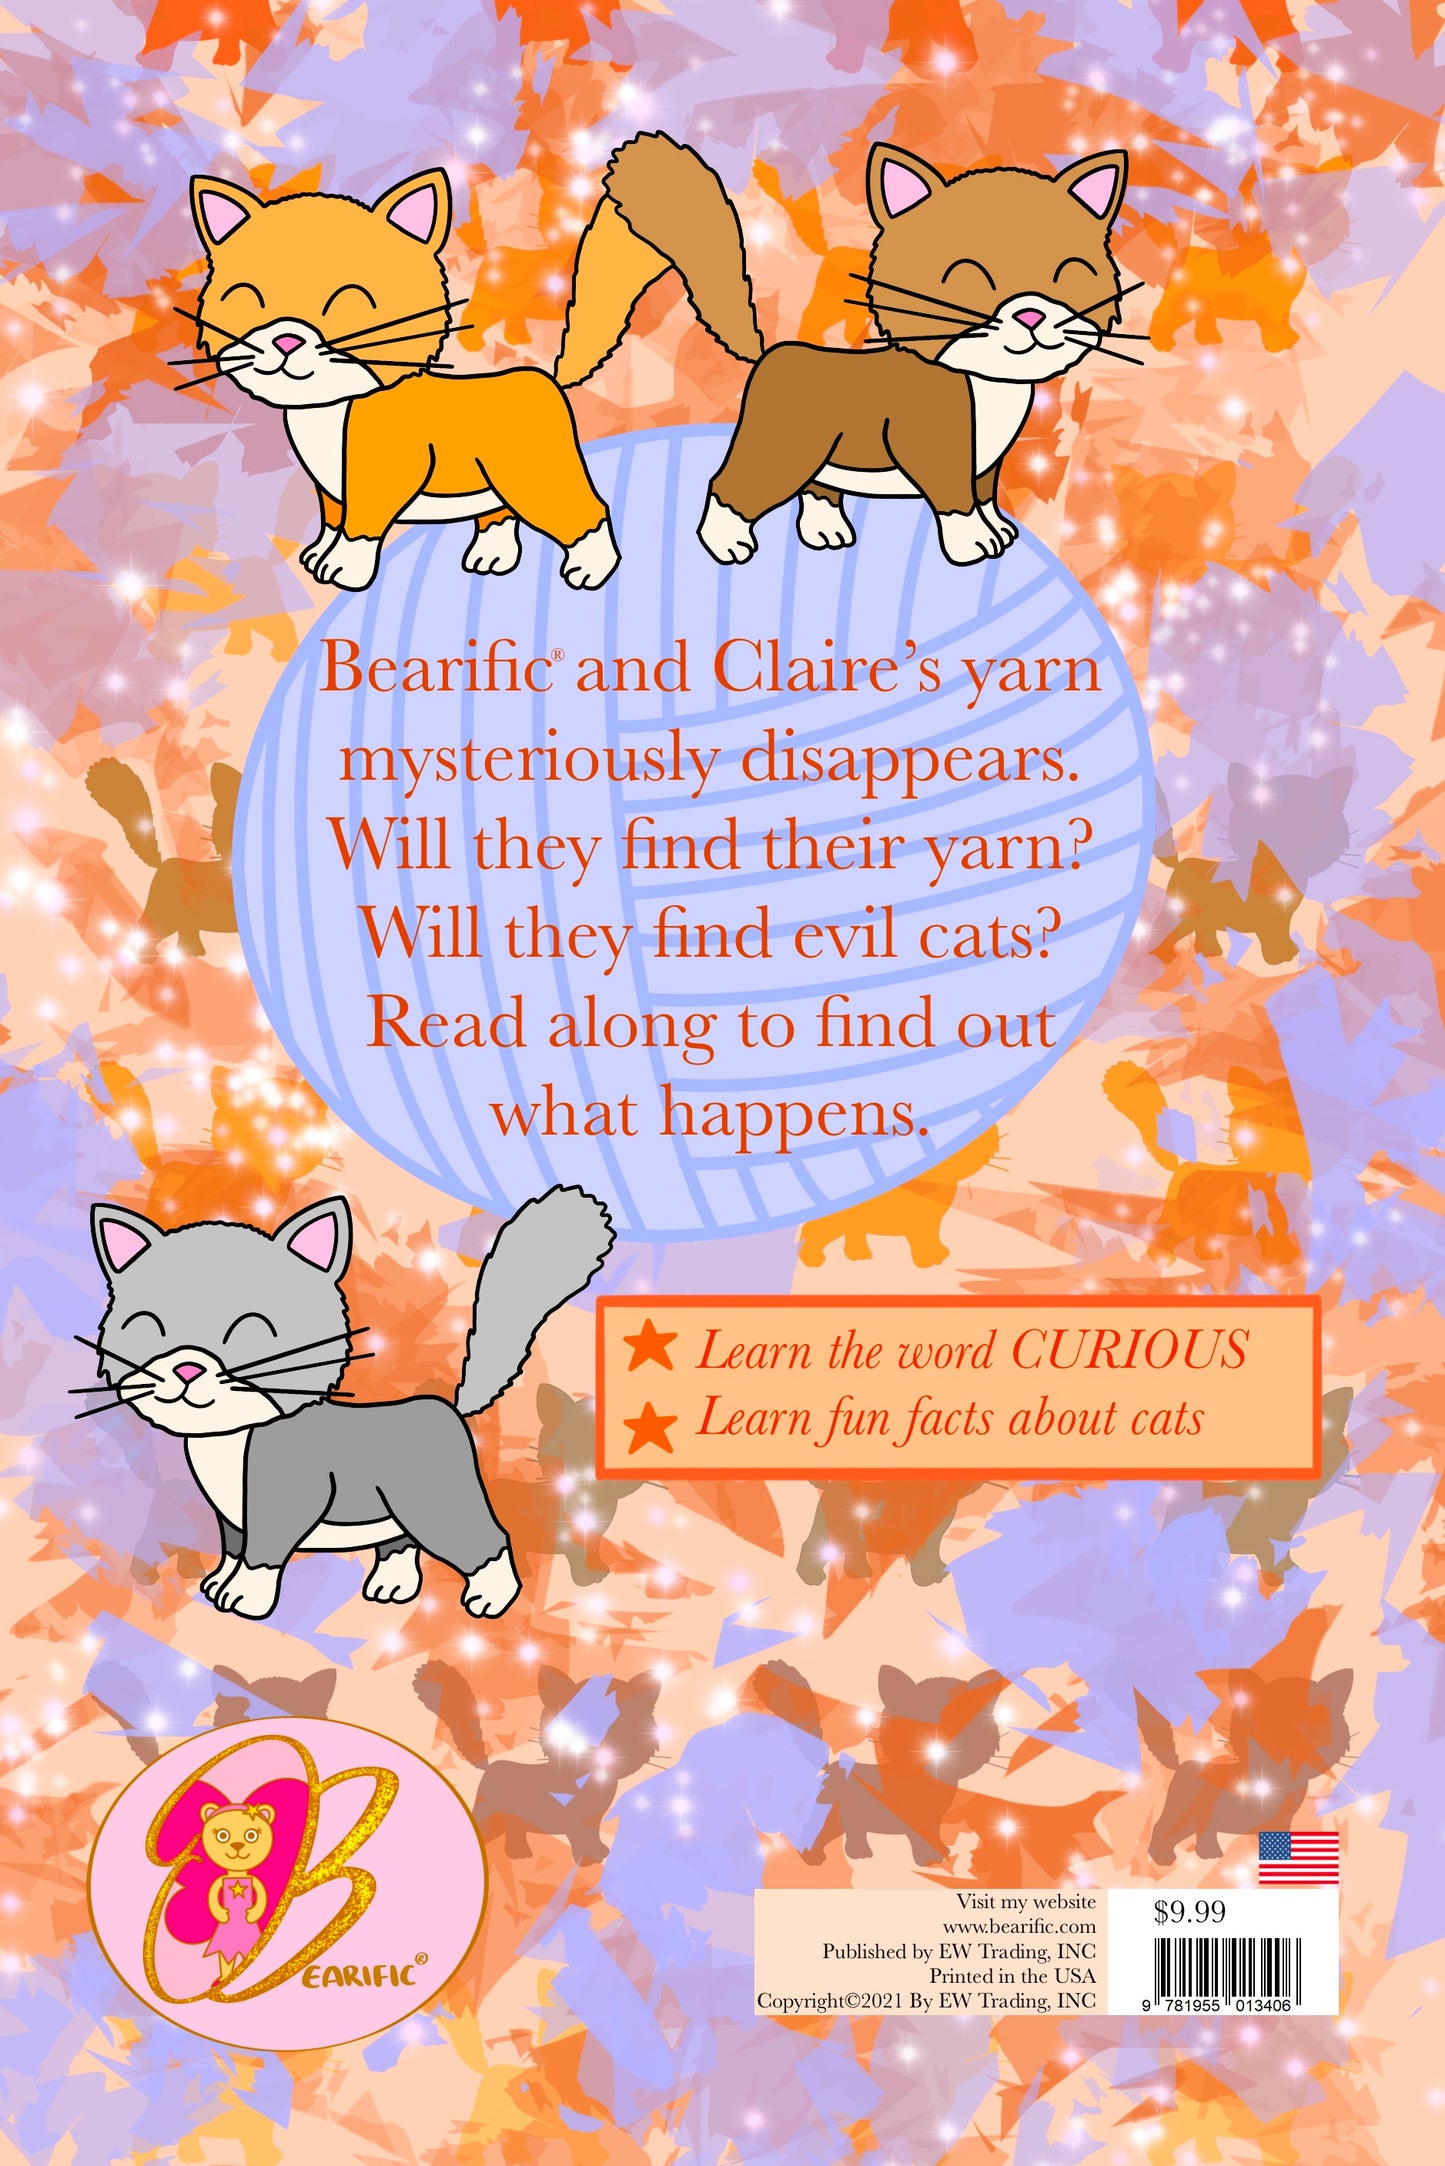 Bearific® and the Curious Cats